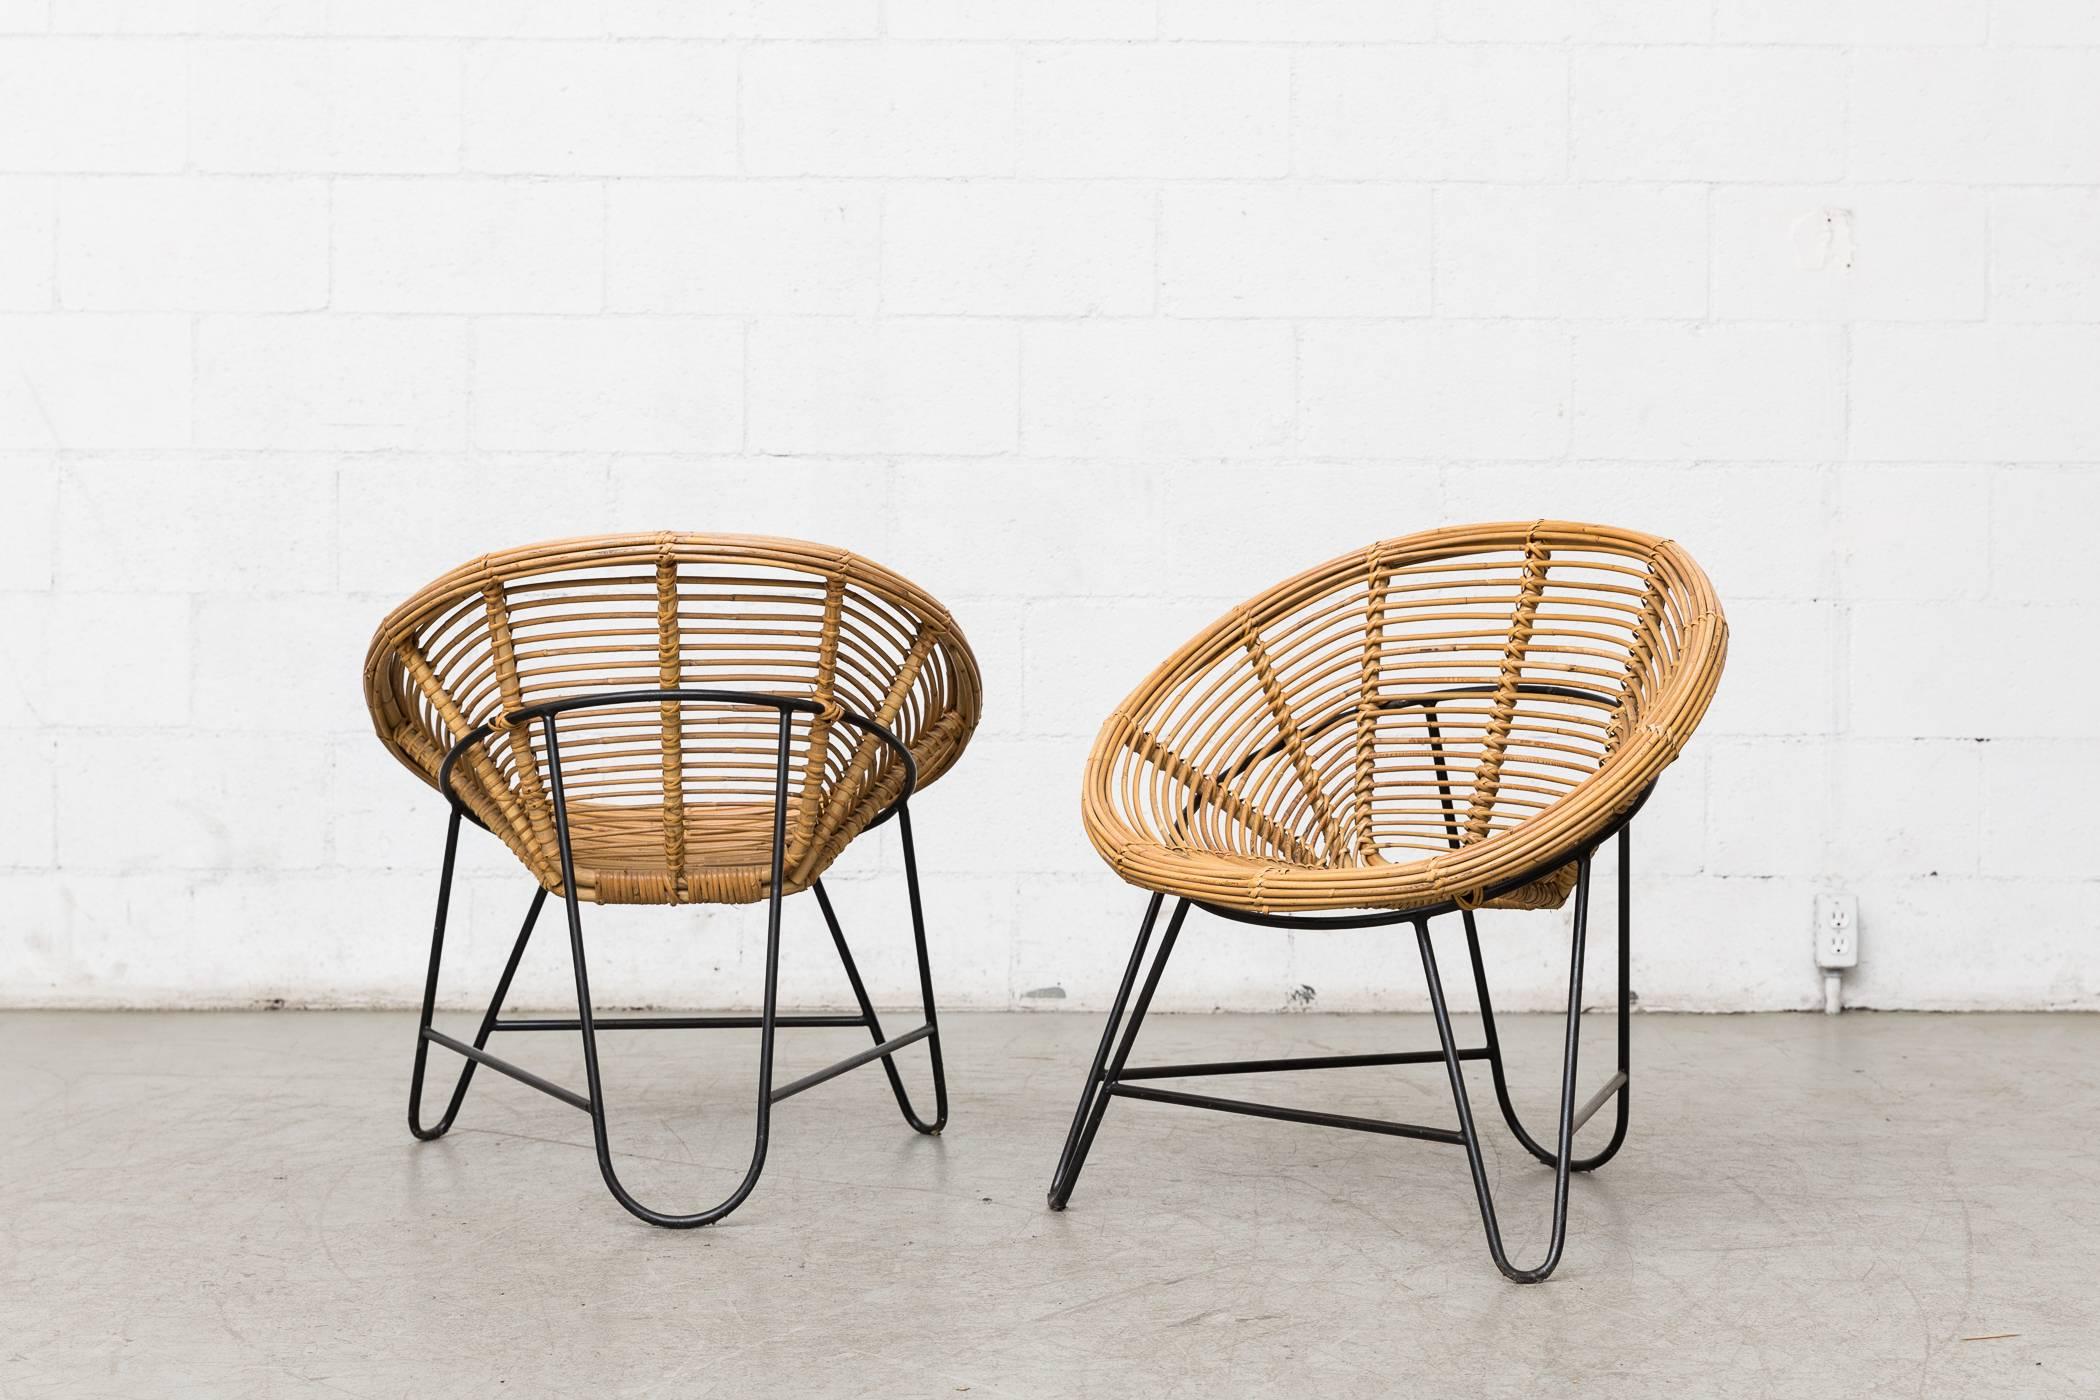 Enameled Pair of Onion Skin Patterned Bamboo Hoop Chairs